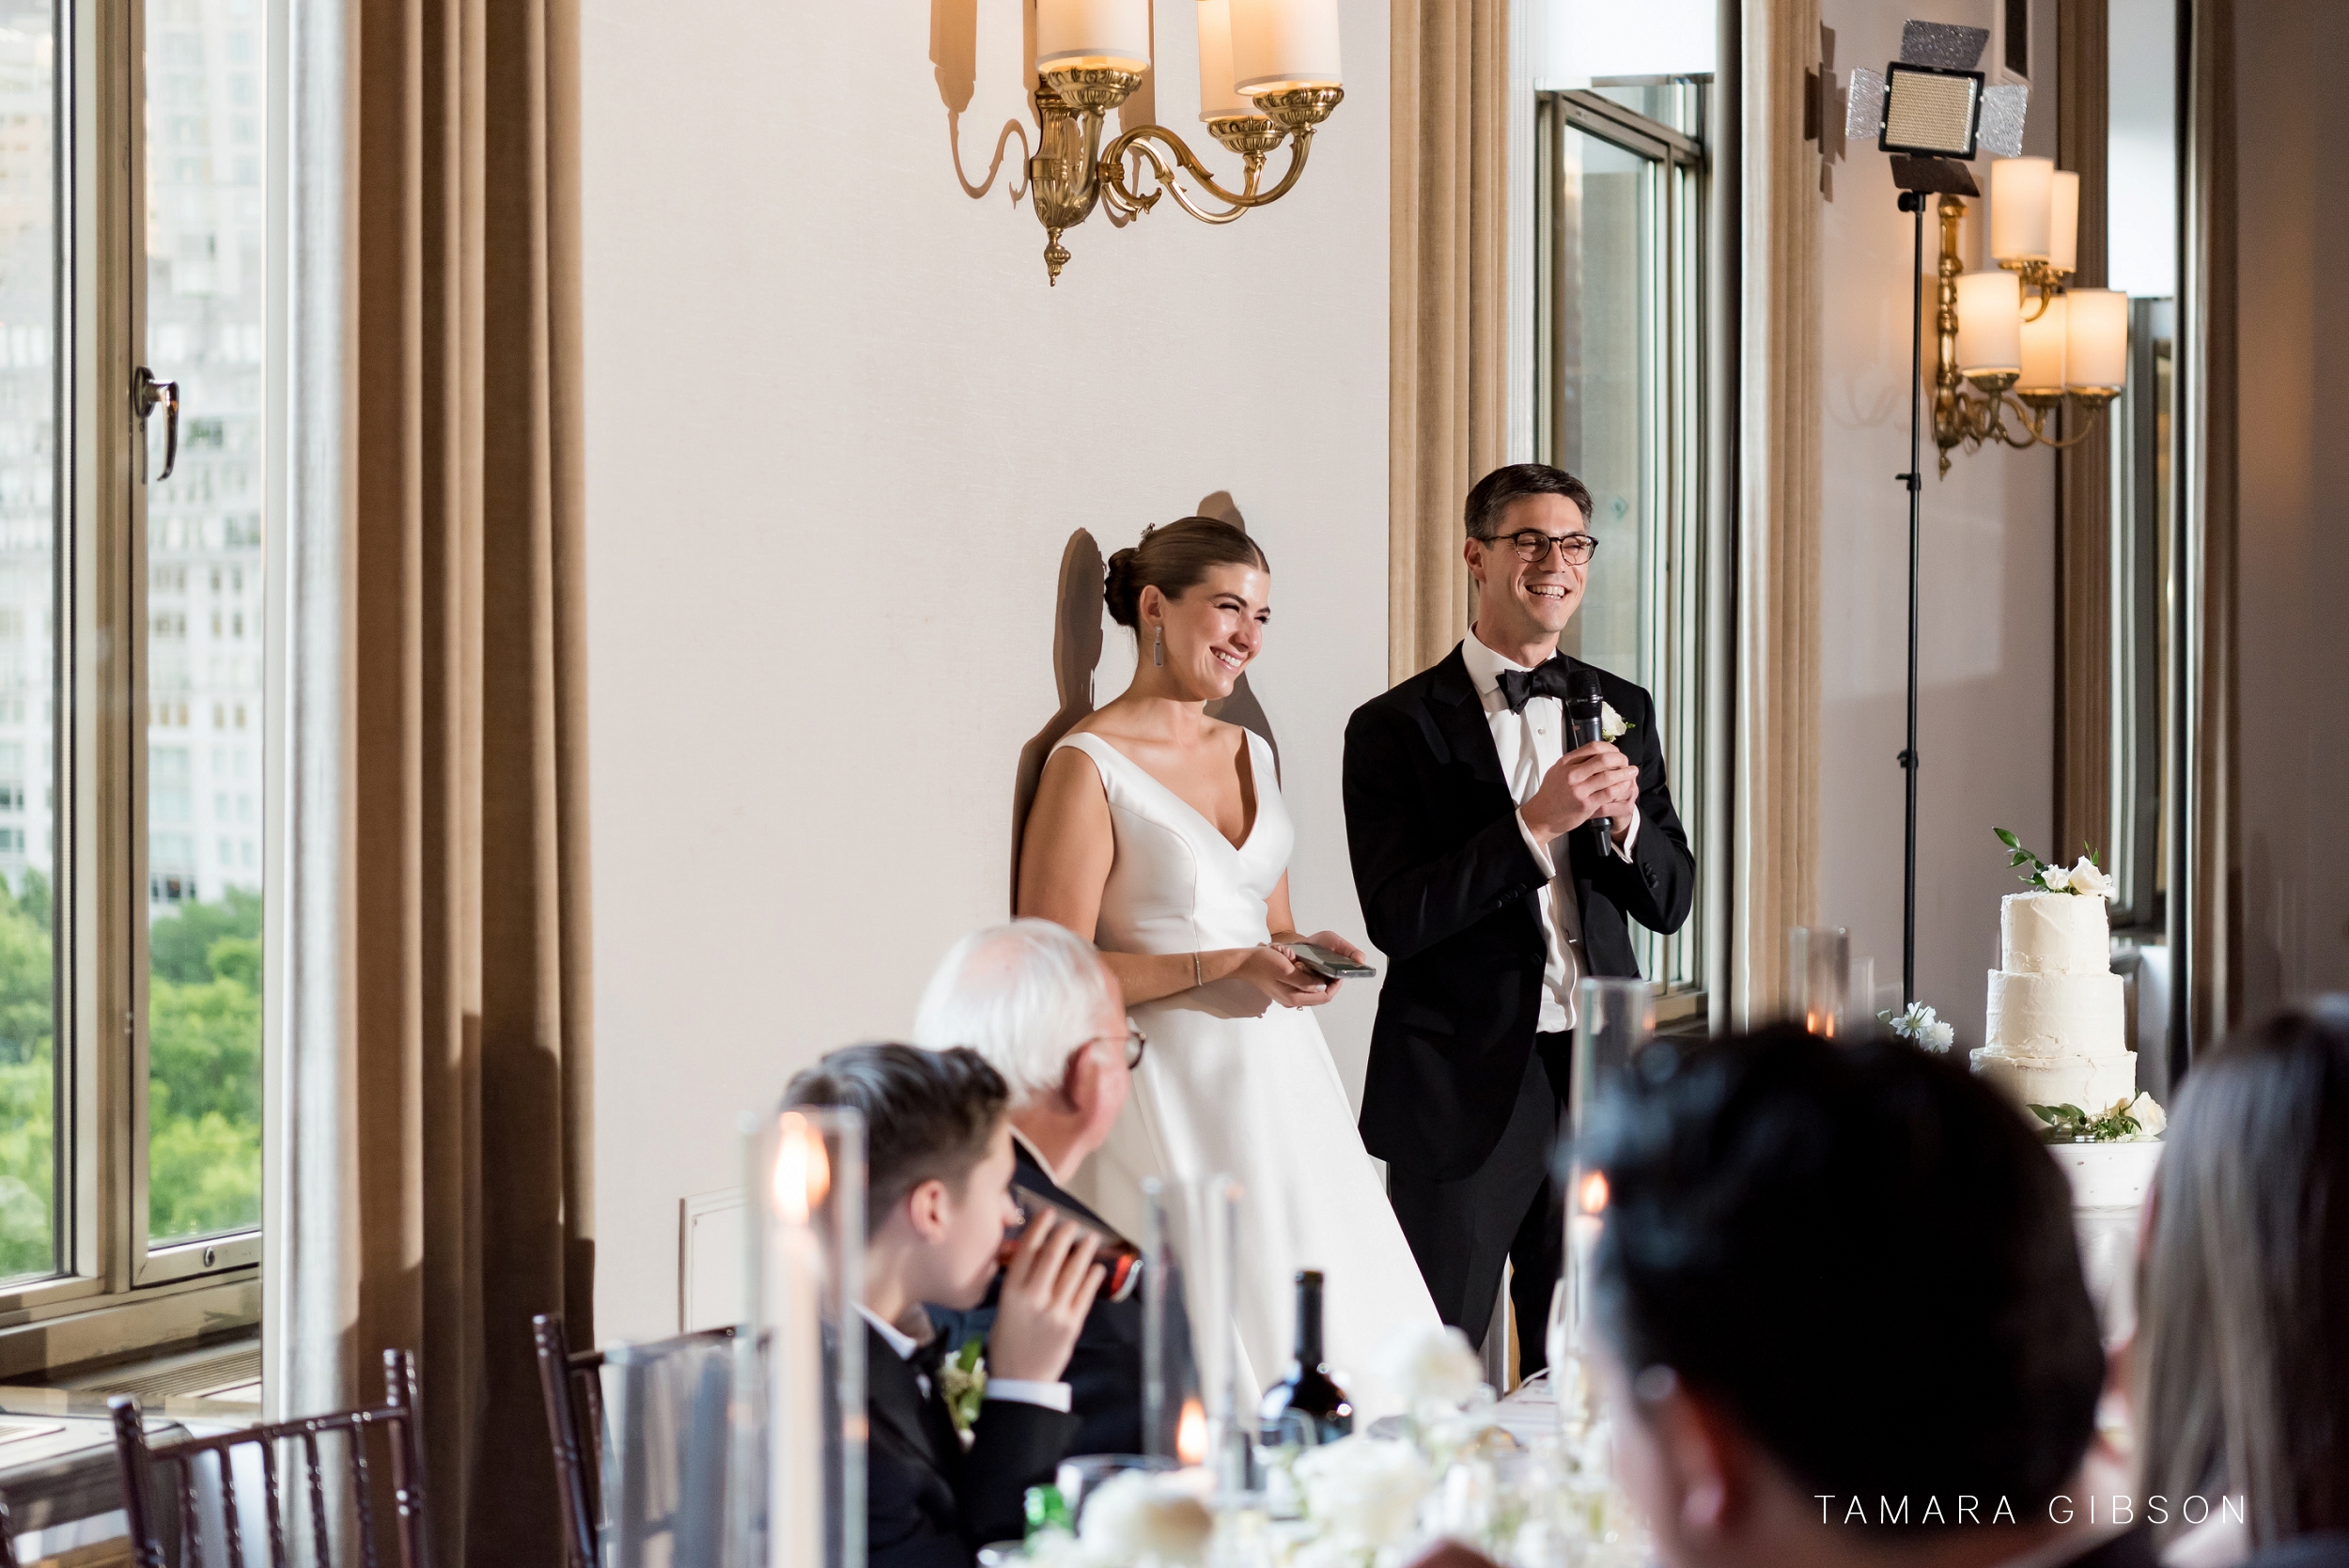 Victoria and Thomas during speech at New York Athletic Club during NYC Wedding